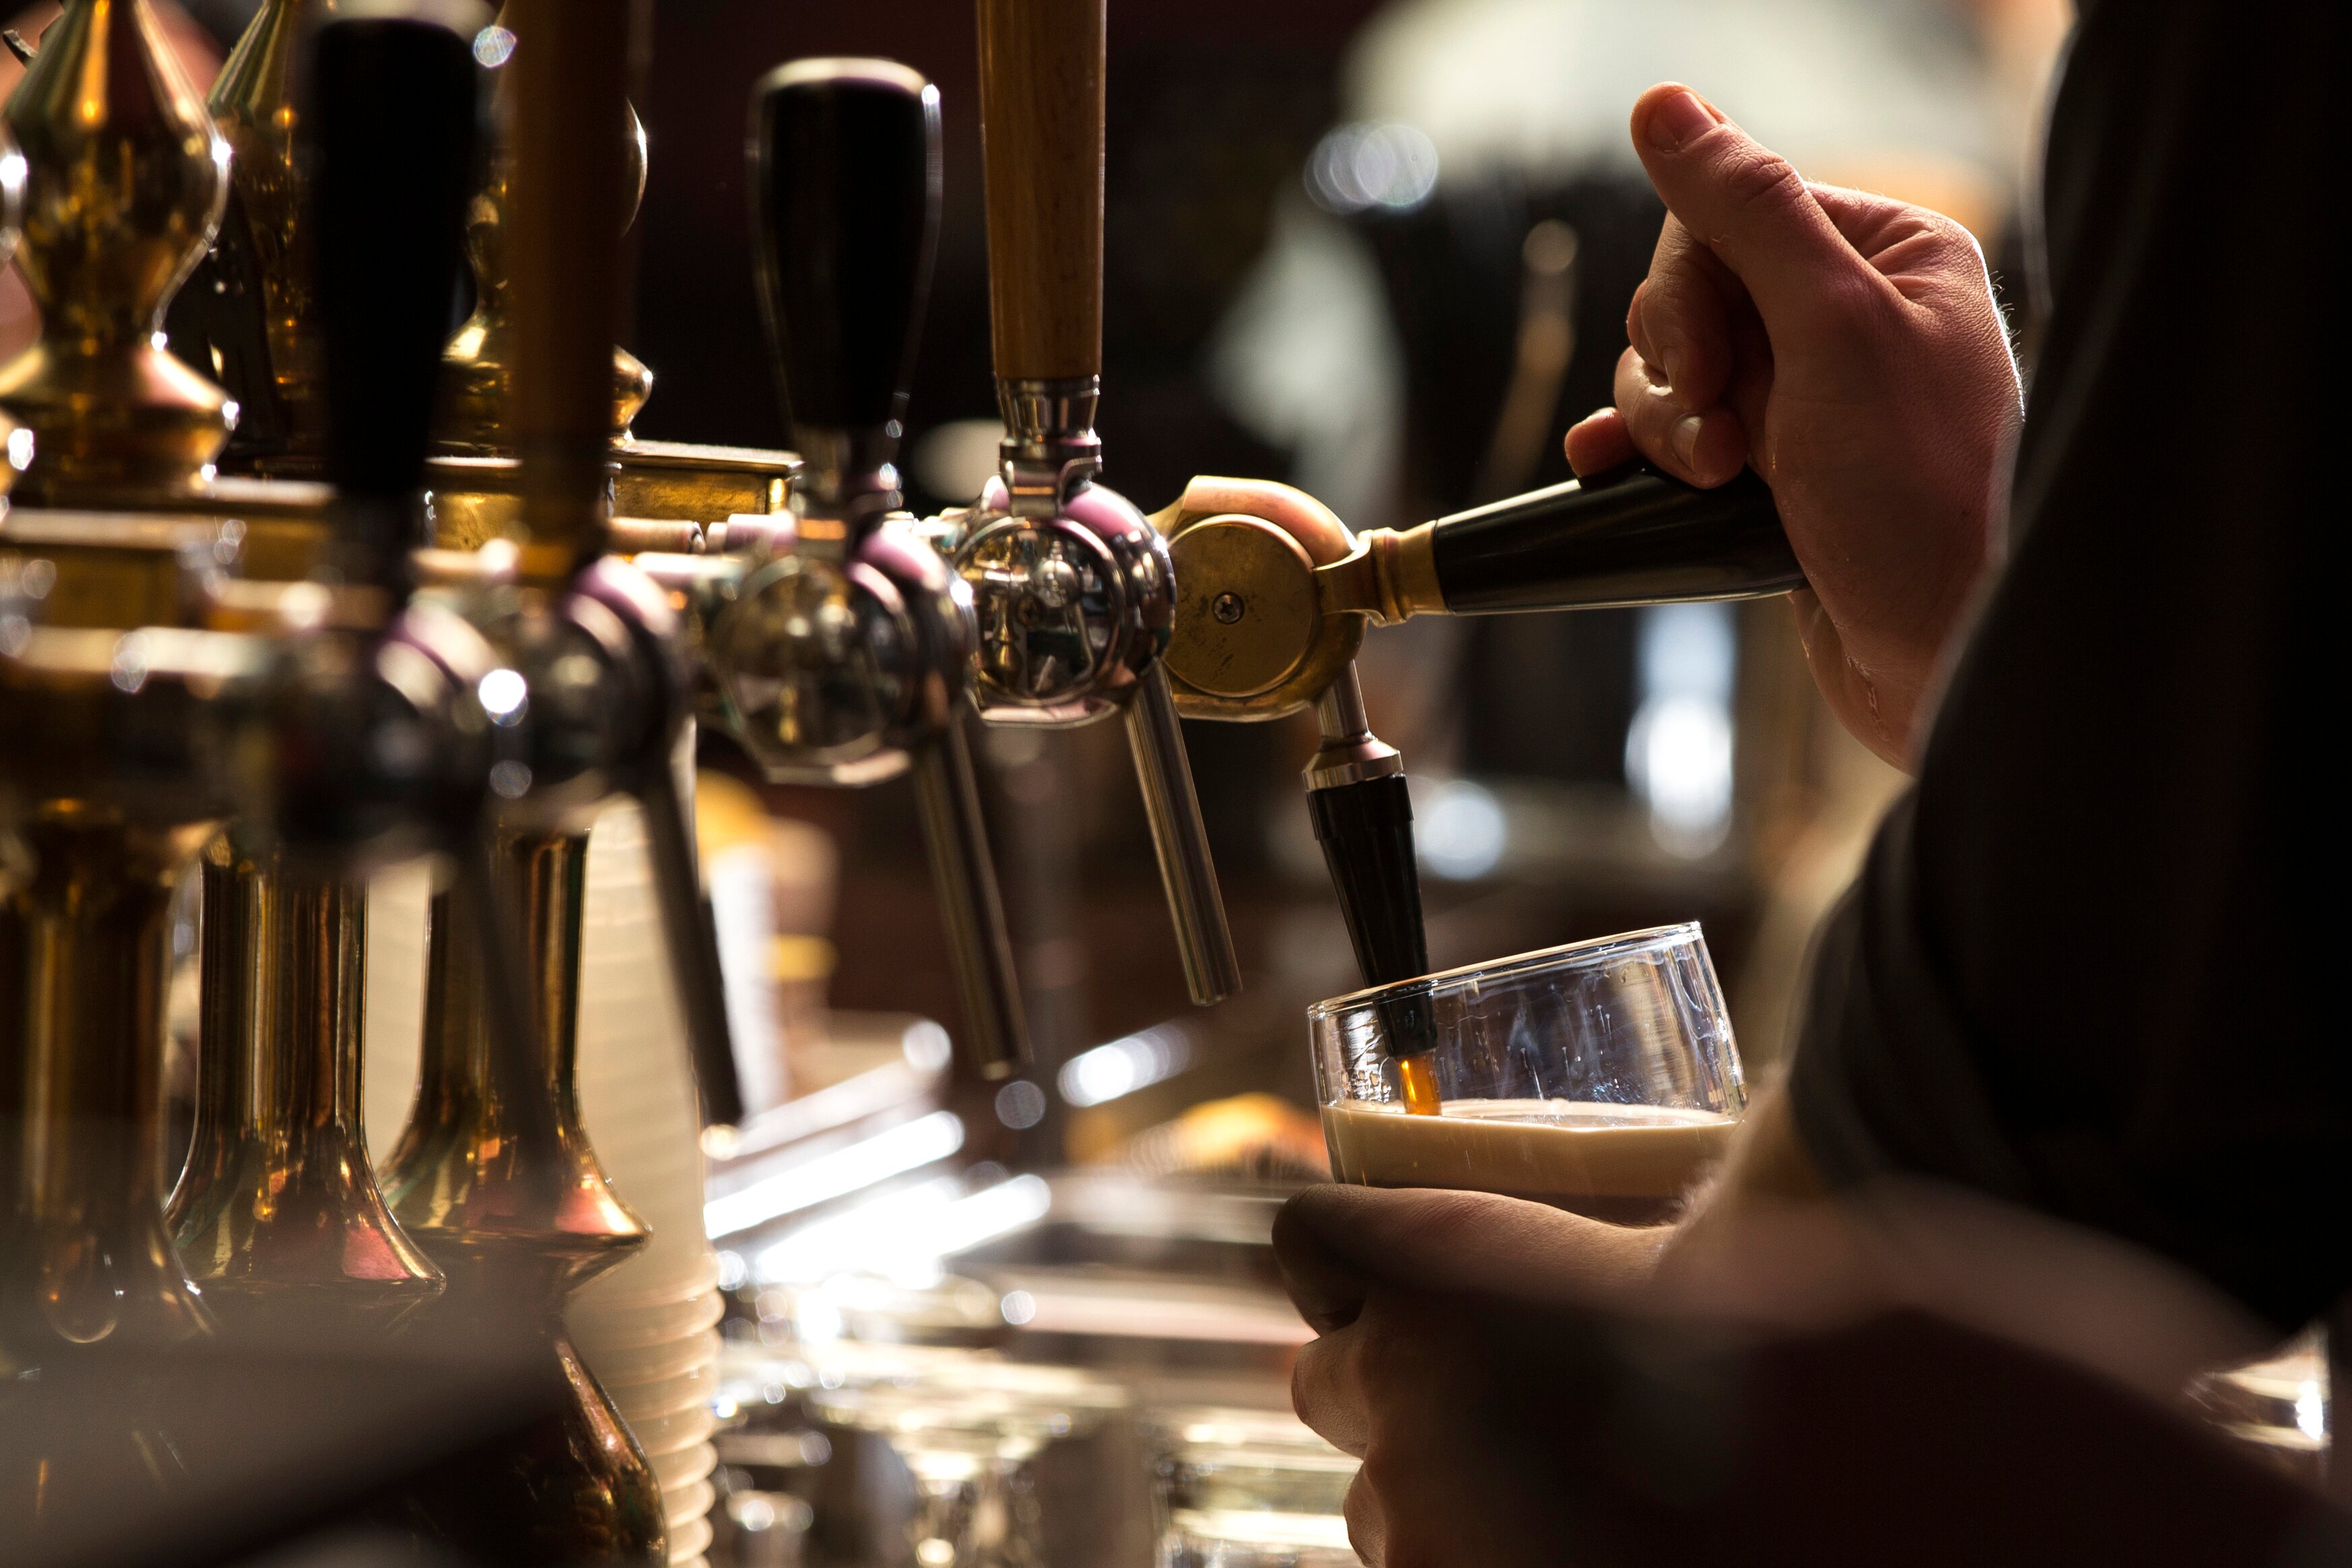 Beer and pub sector leaders set out recovery roadmap as sales plummet by £7.8b